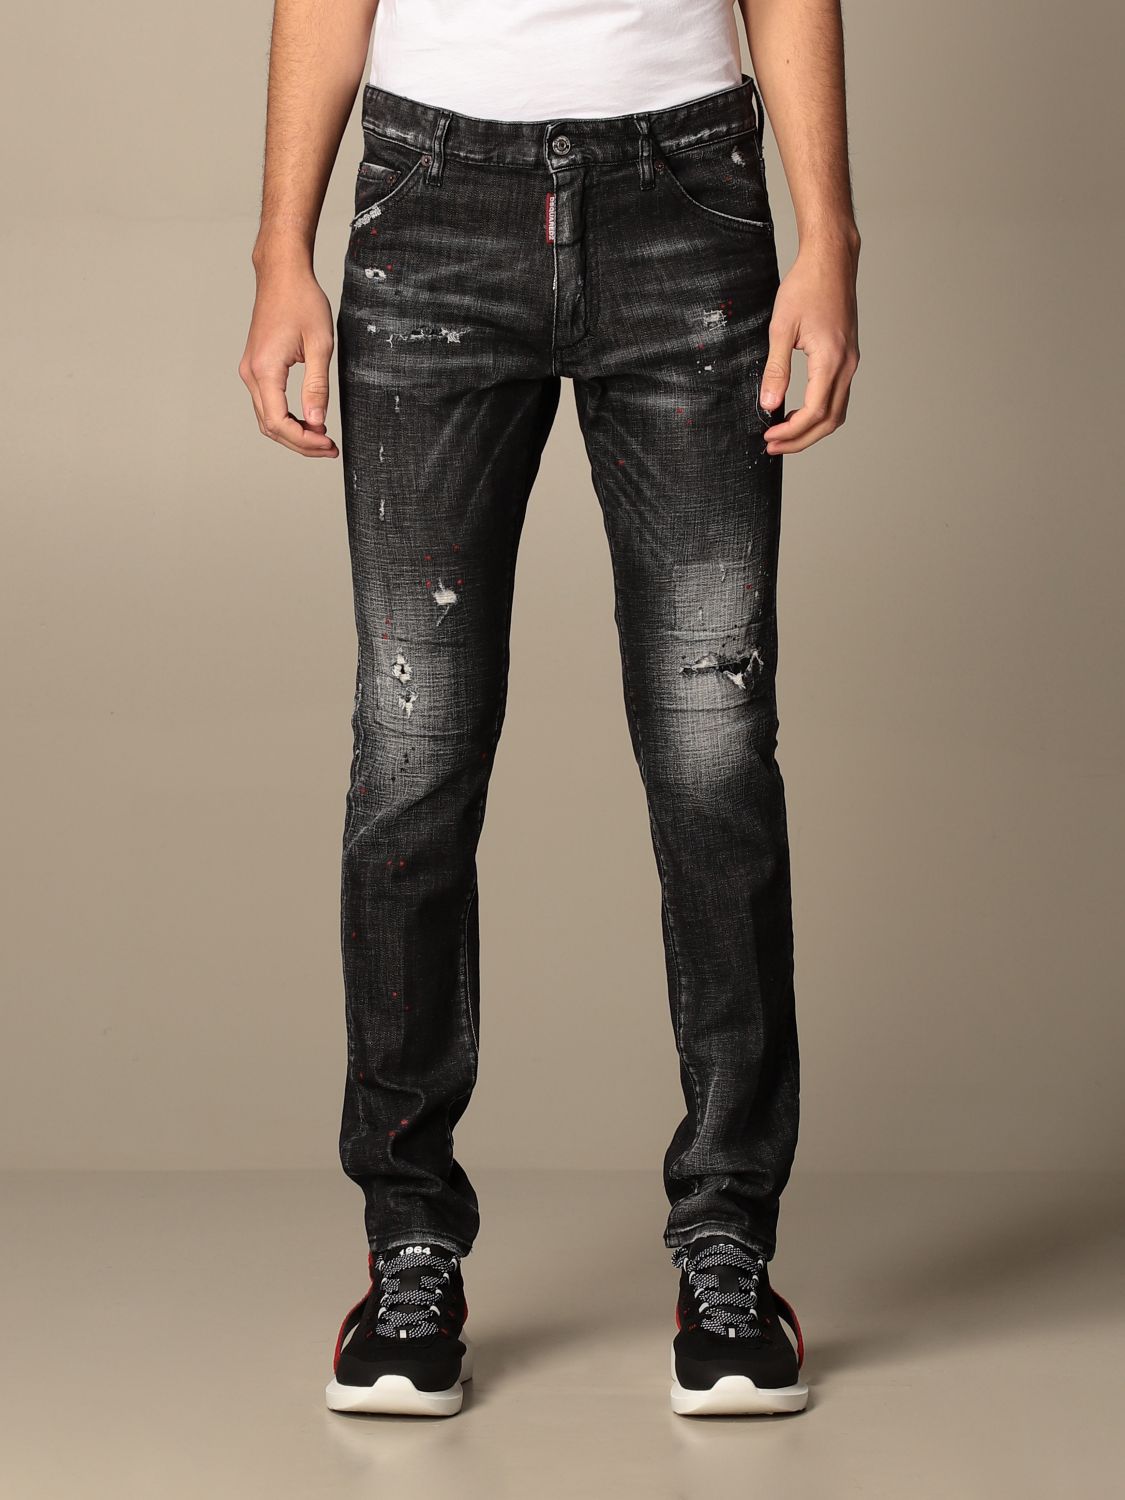 Dsquared2 Jeans In Denim With Tears Black | ModeSens